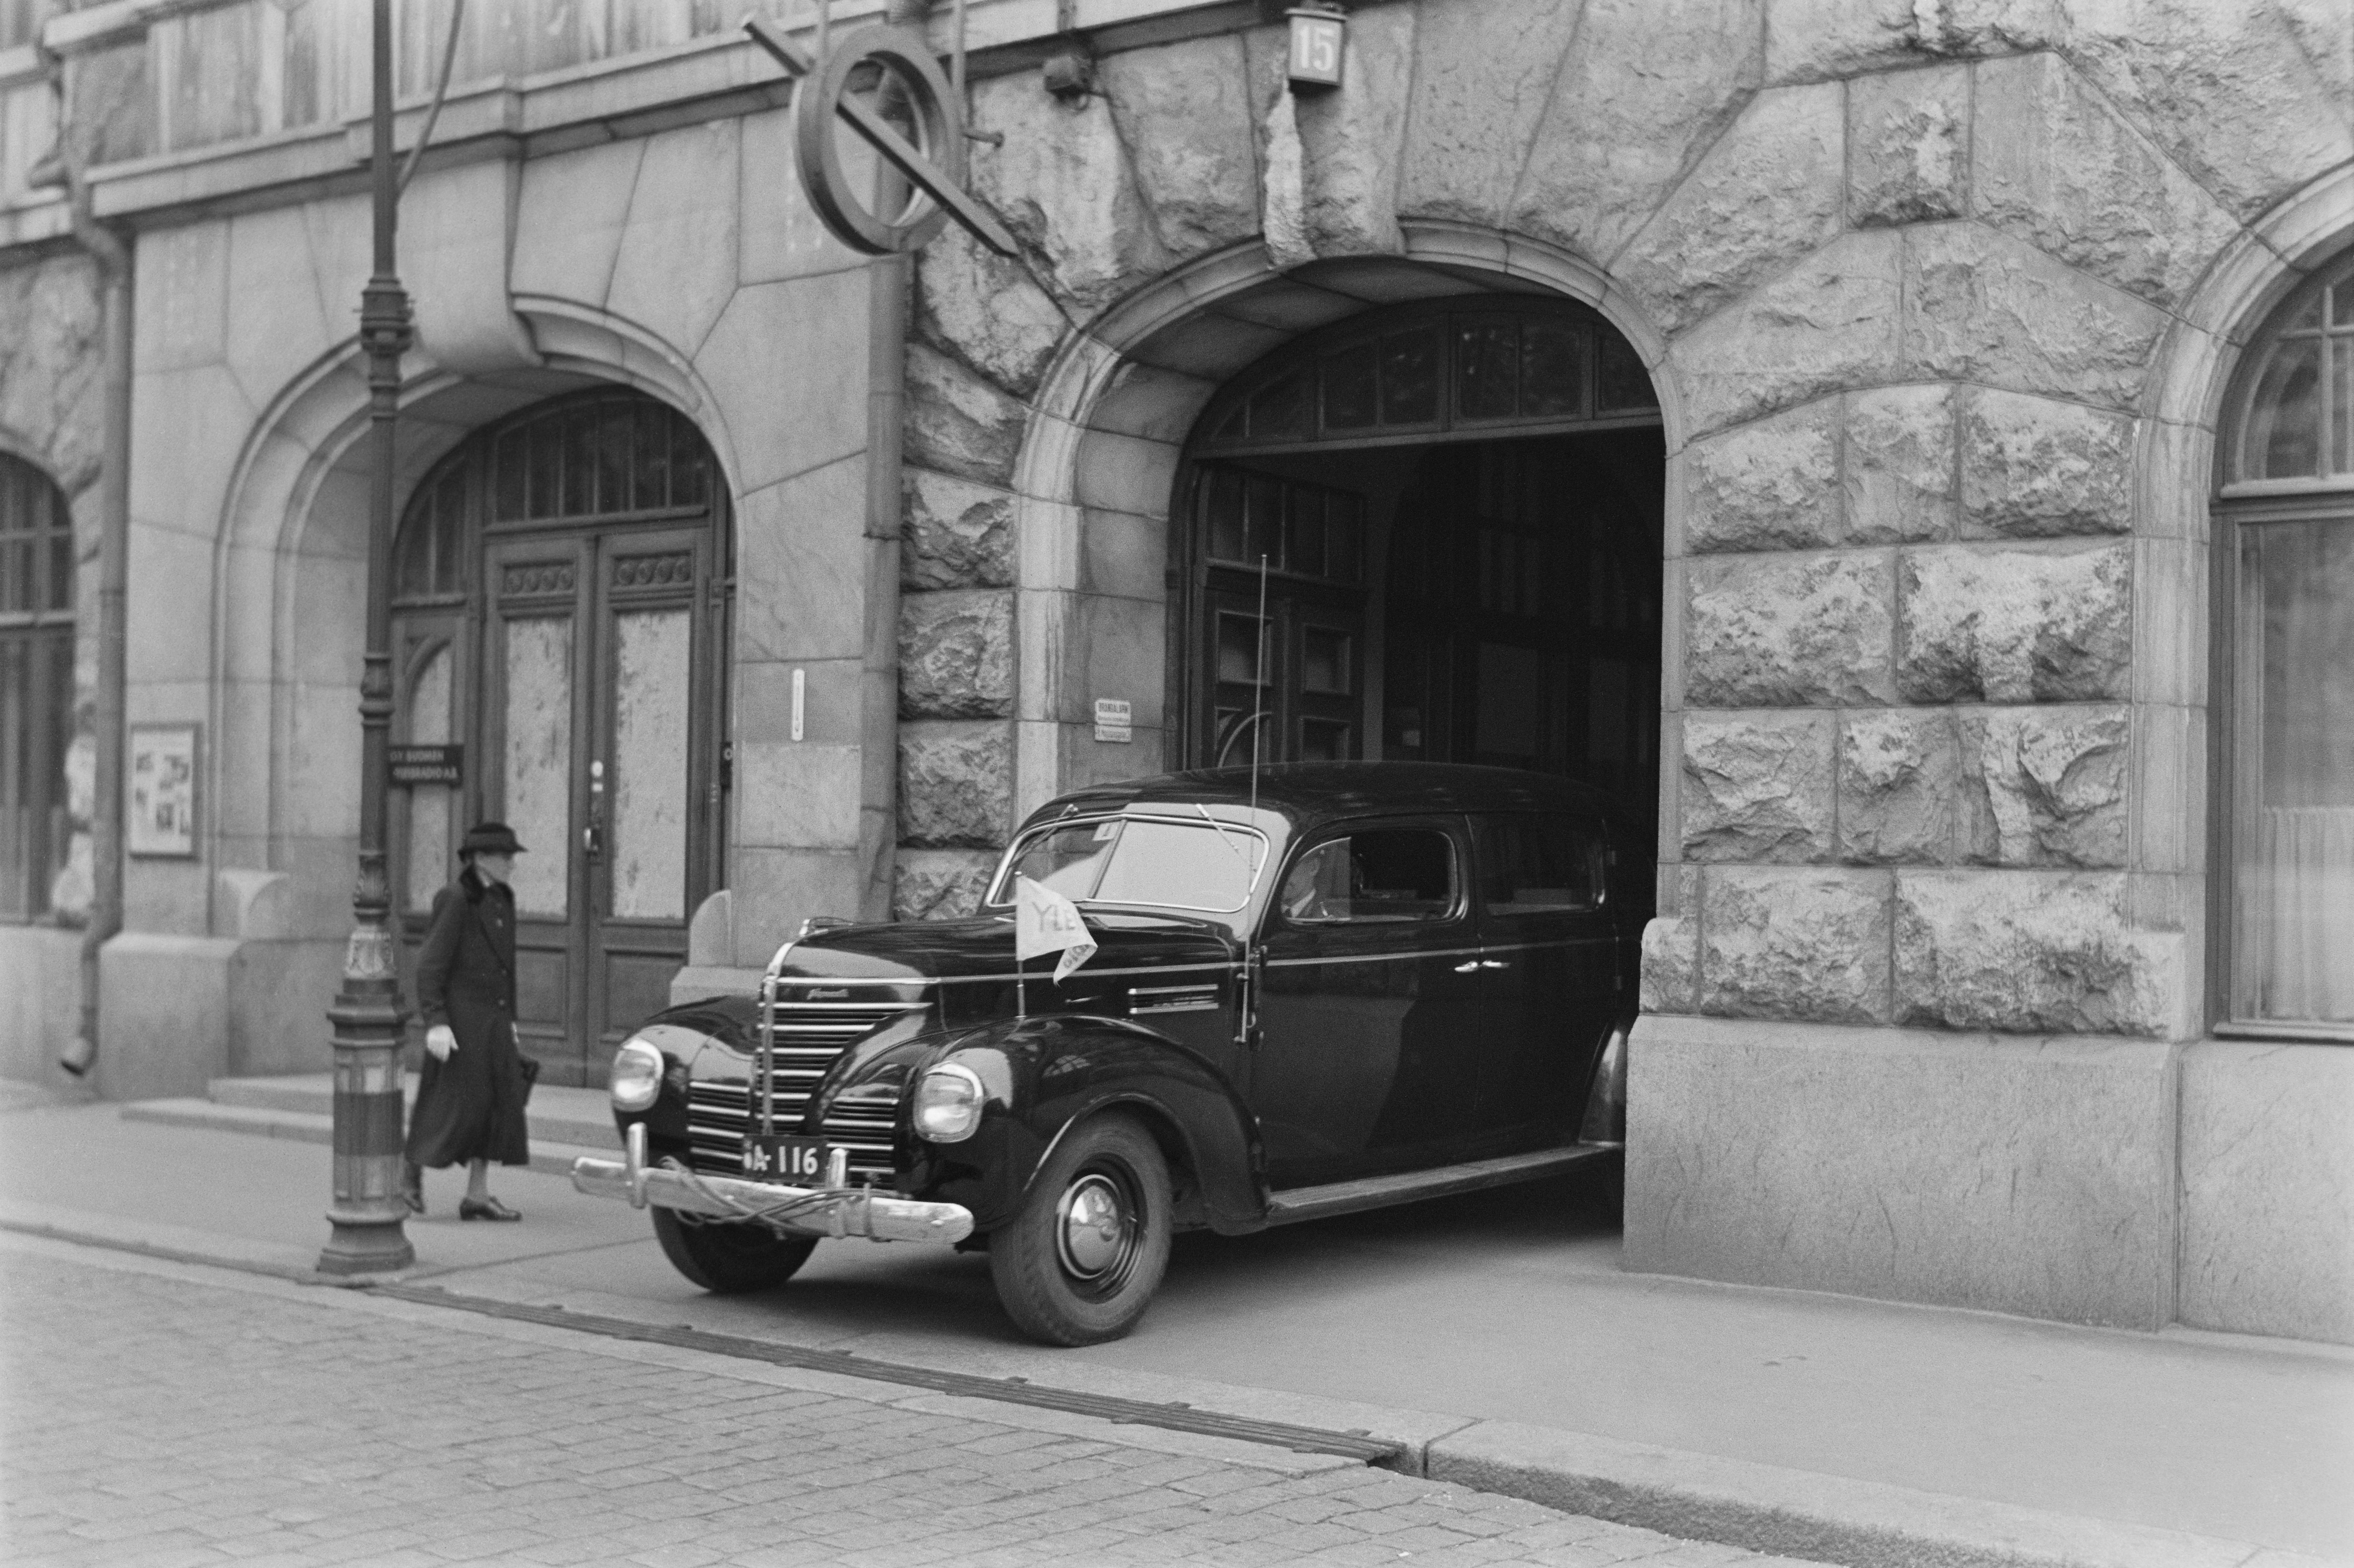 A car exits the Radio House gate is Fabianinkatu in Helsinki, 1930s - a passenger car with a general radio flag (car registration number A-116) driving out of the gate of the Fabianinkatu Radio House next to the main entrance (Fabianinkatu 15, Helsinki).